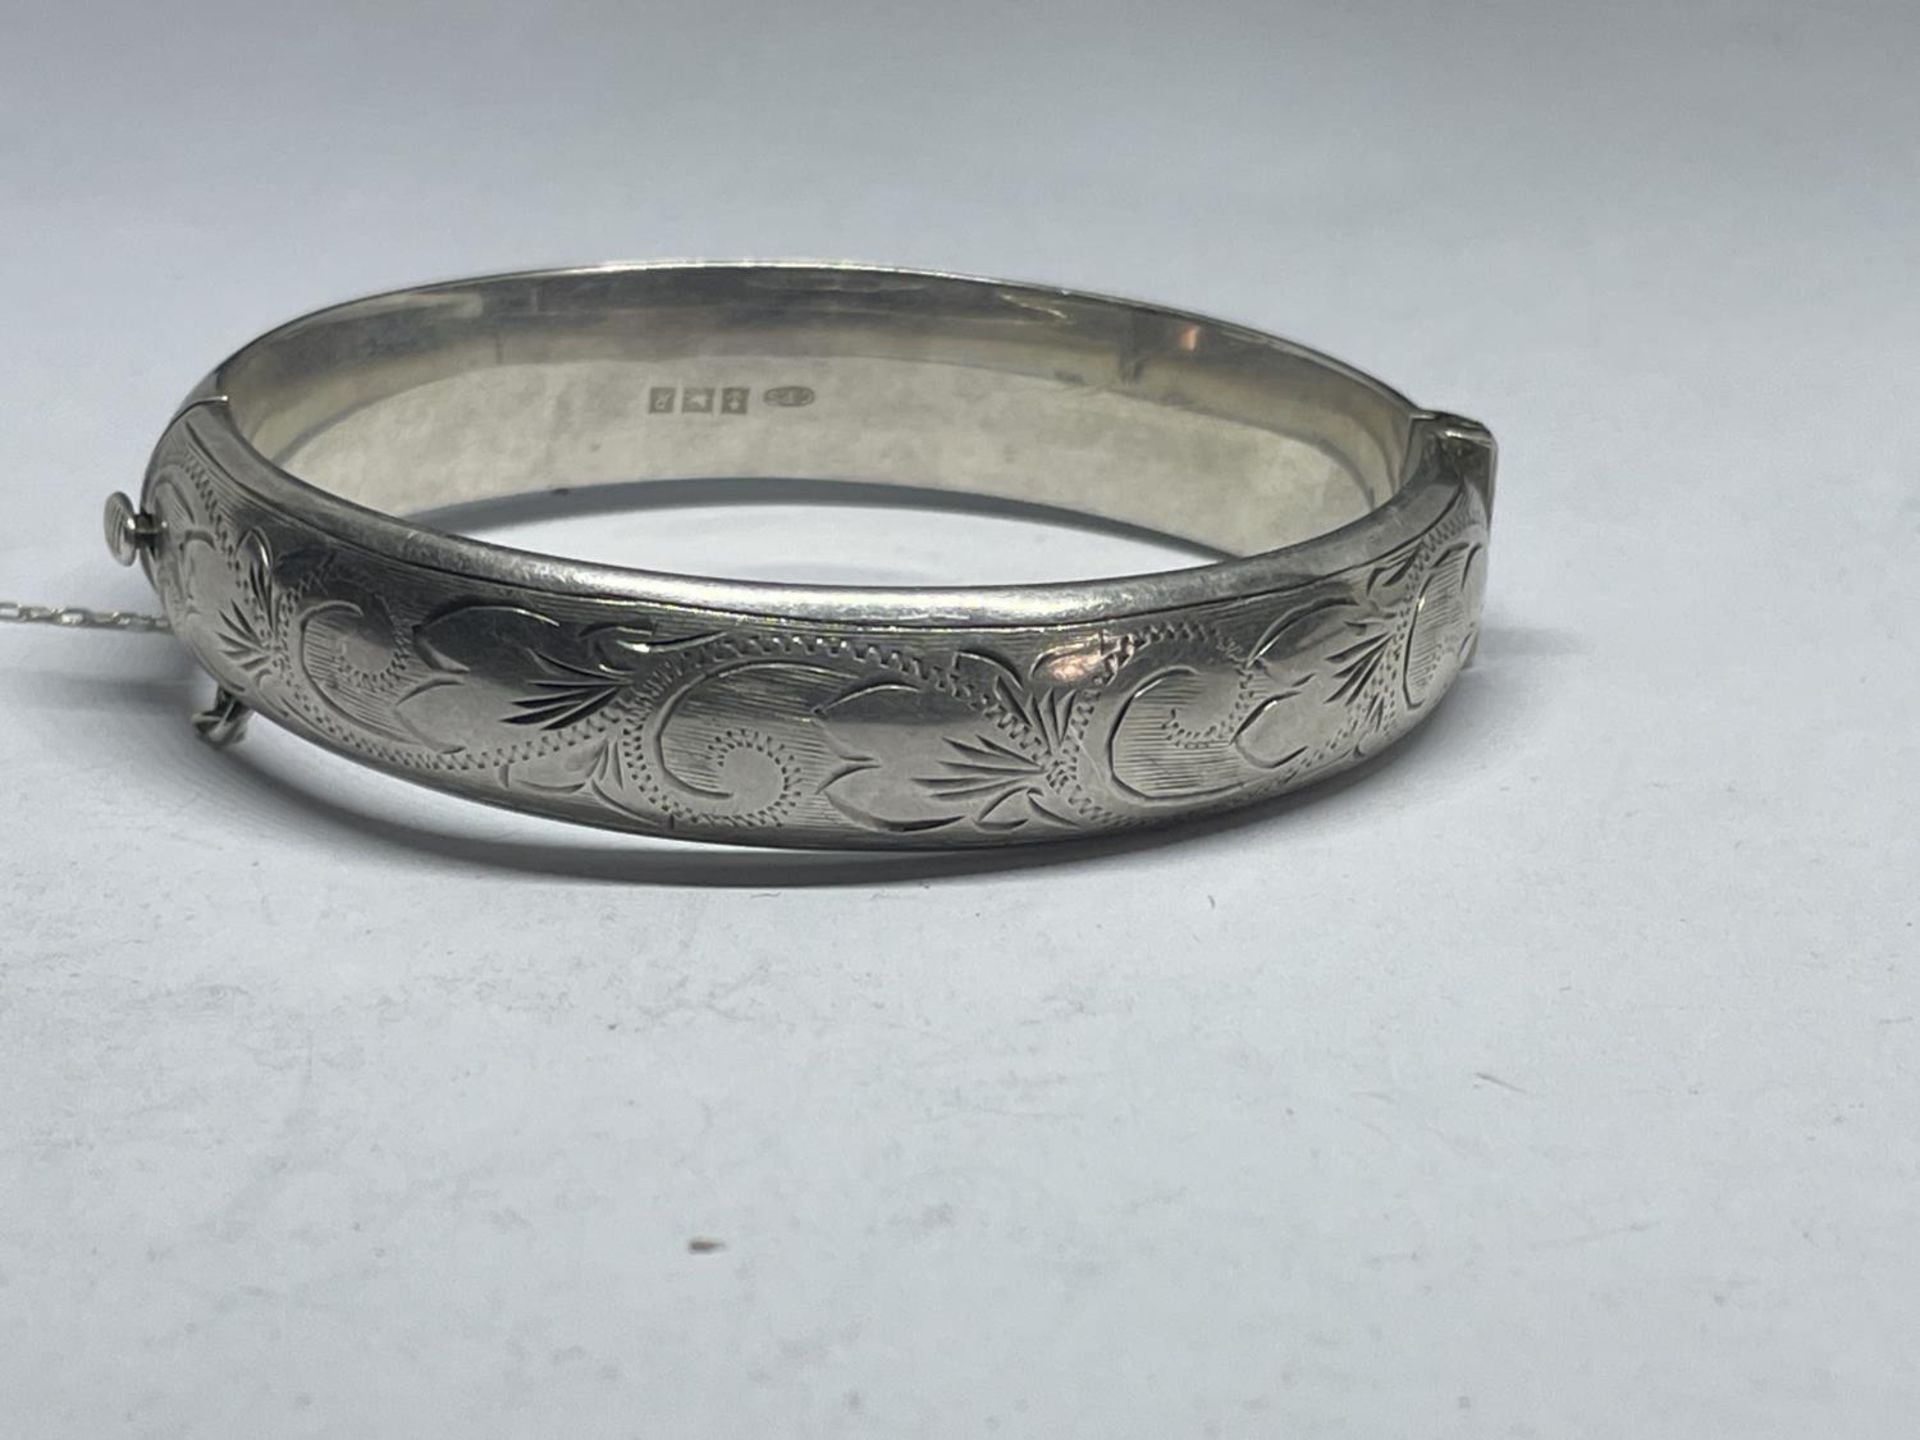 A HALLMARKED BIRMINGHAM SILVER BANGLE WEIGHT 21.3 GRAMS - Image 2 of 4